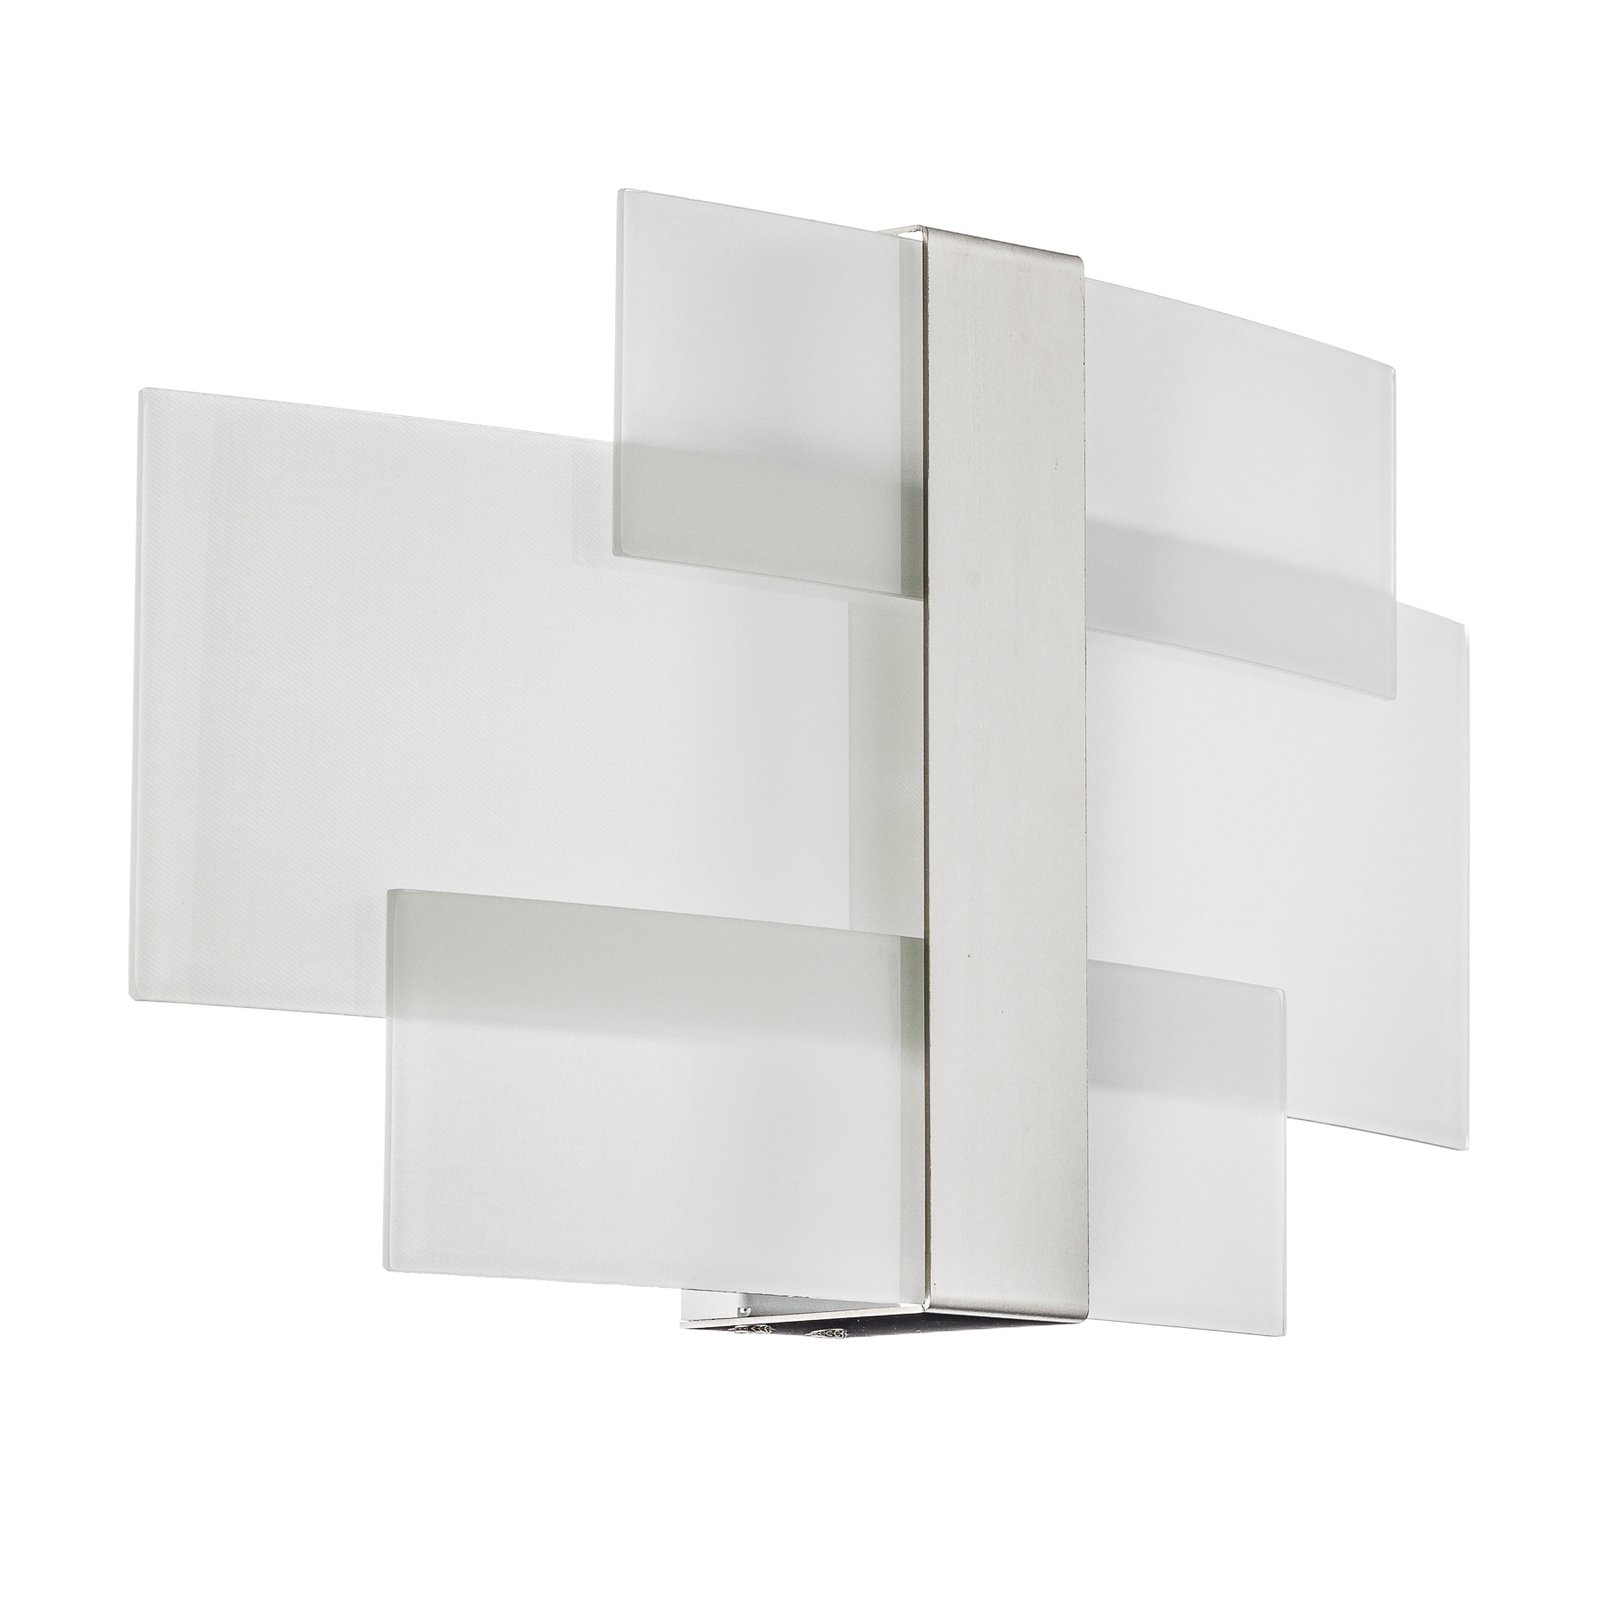 Shifted wall lamp 3 glass sections chrome-plated